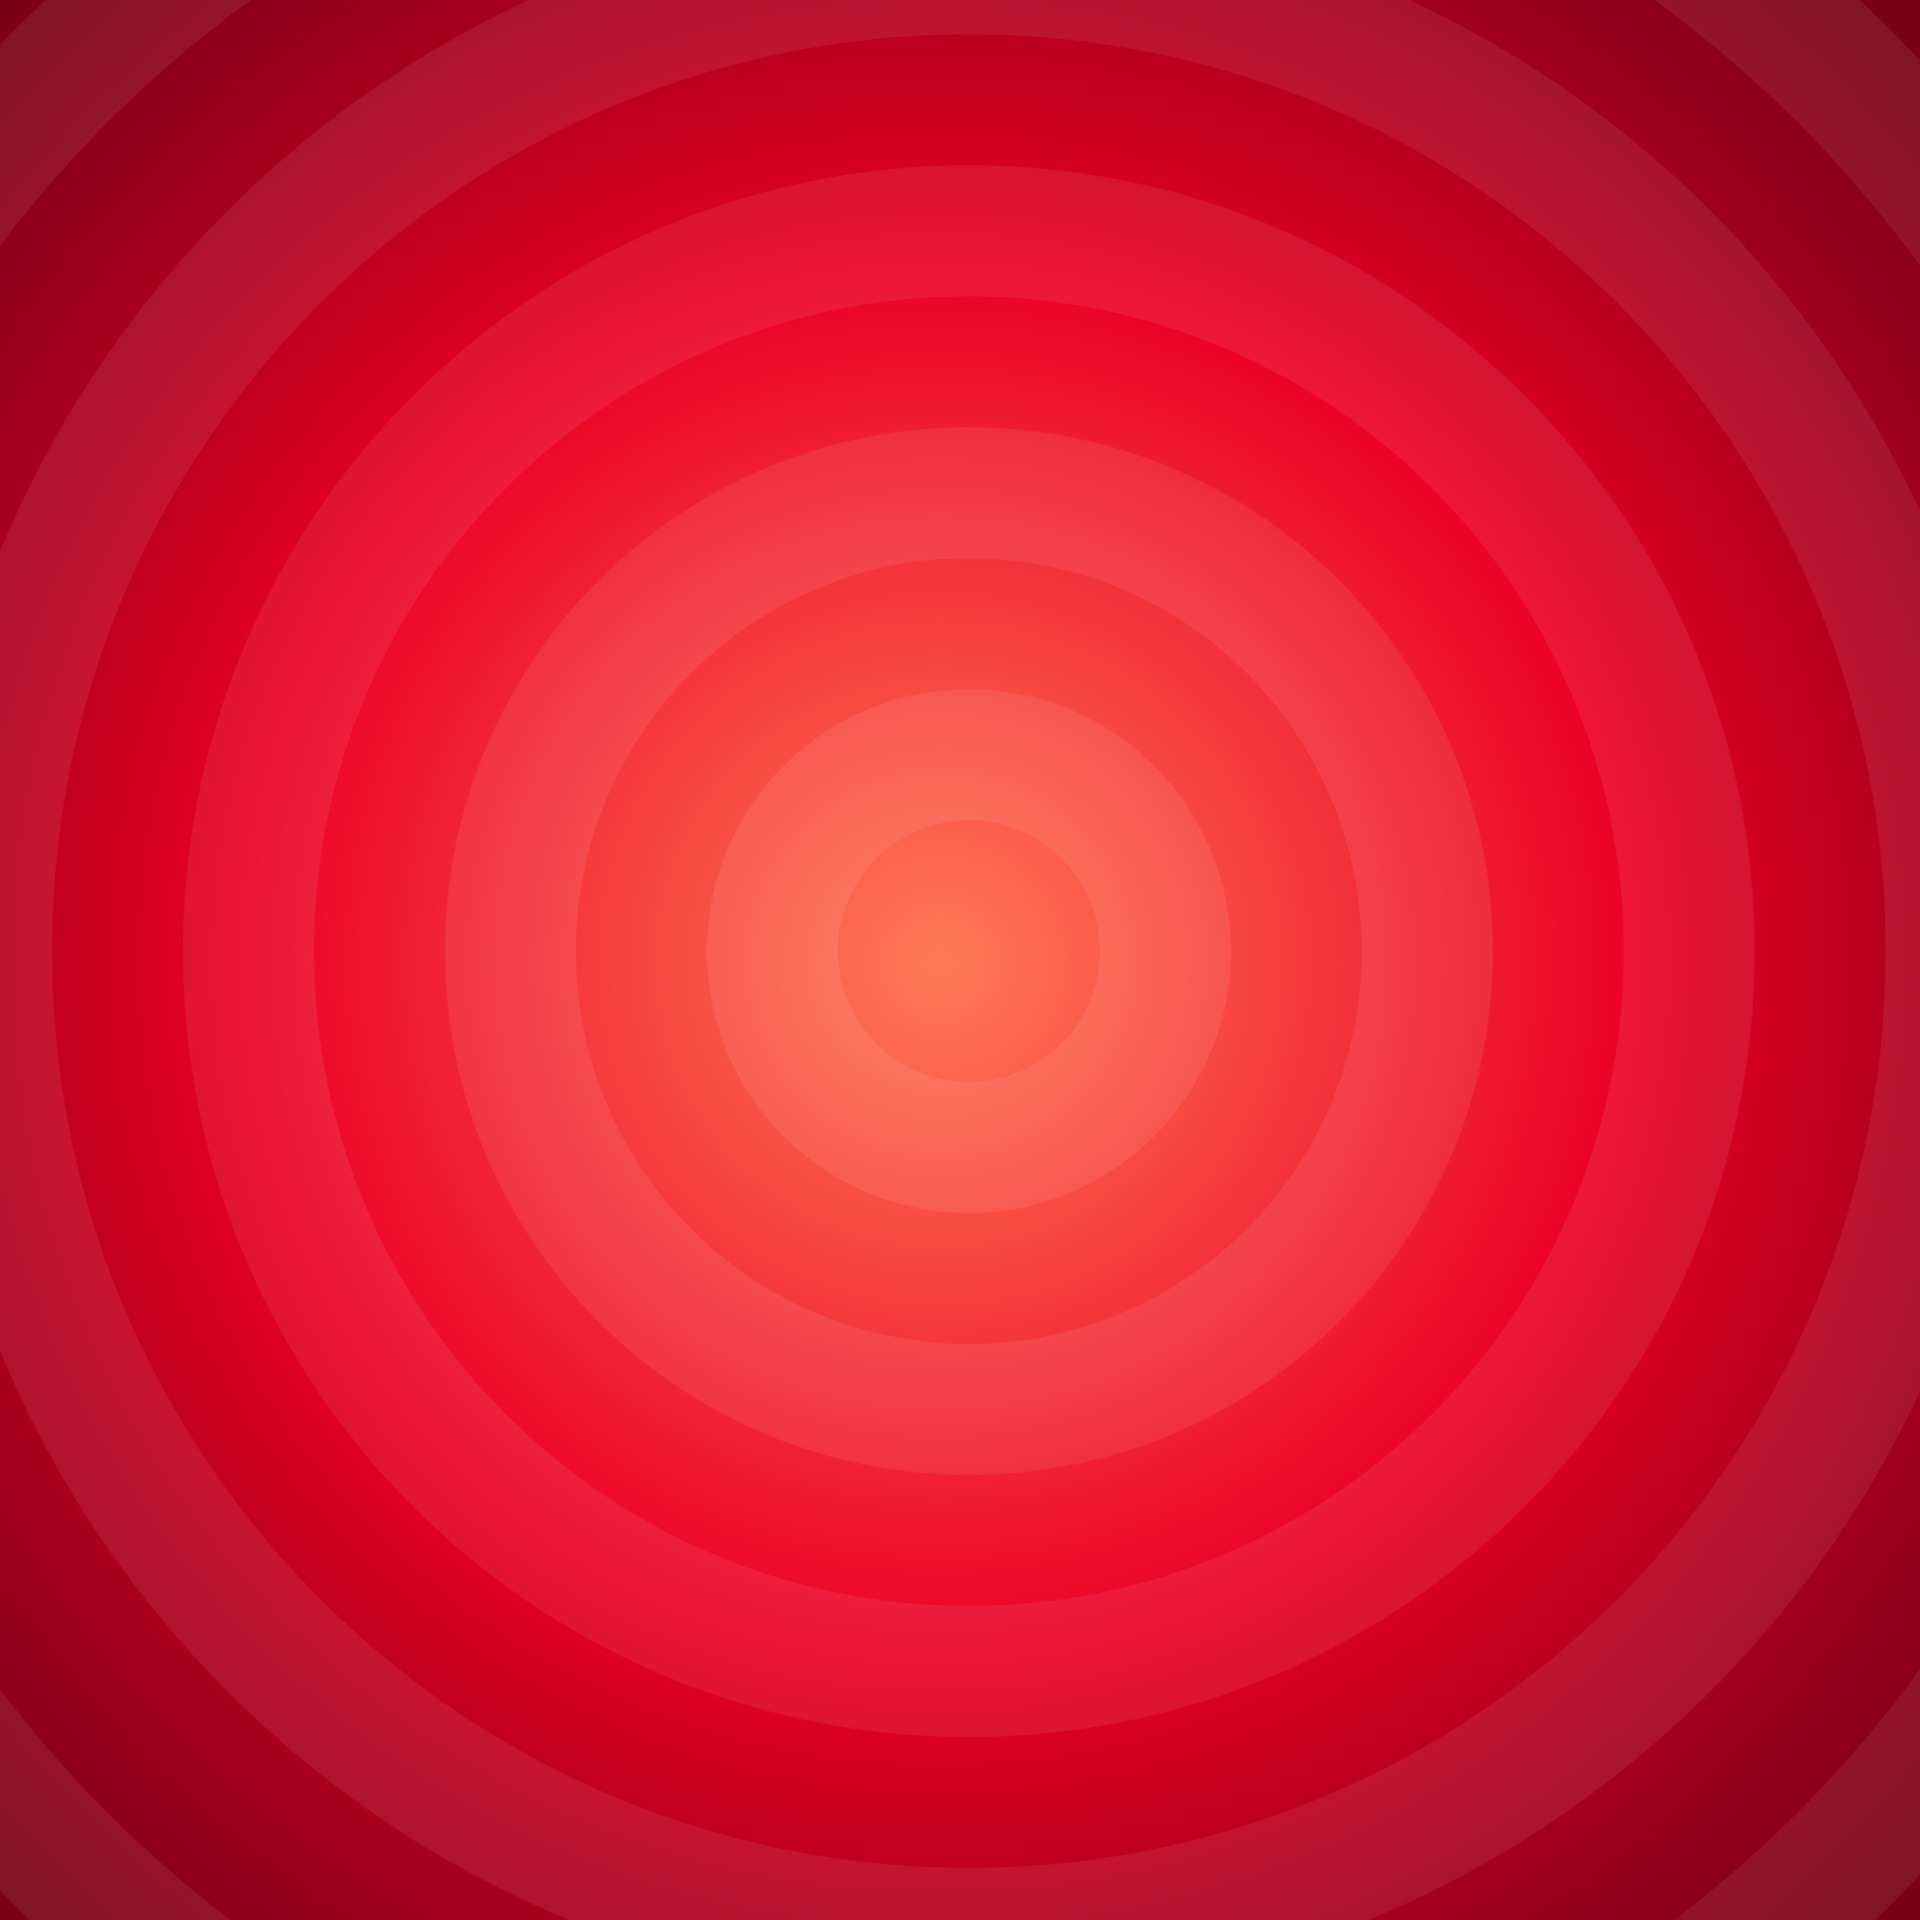 Red Swirl Background Vector Icons, and Free Download